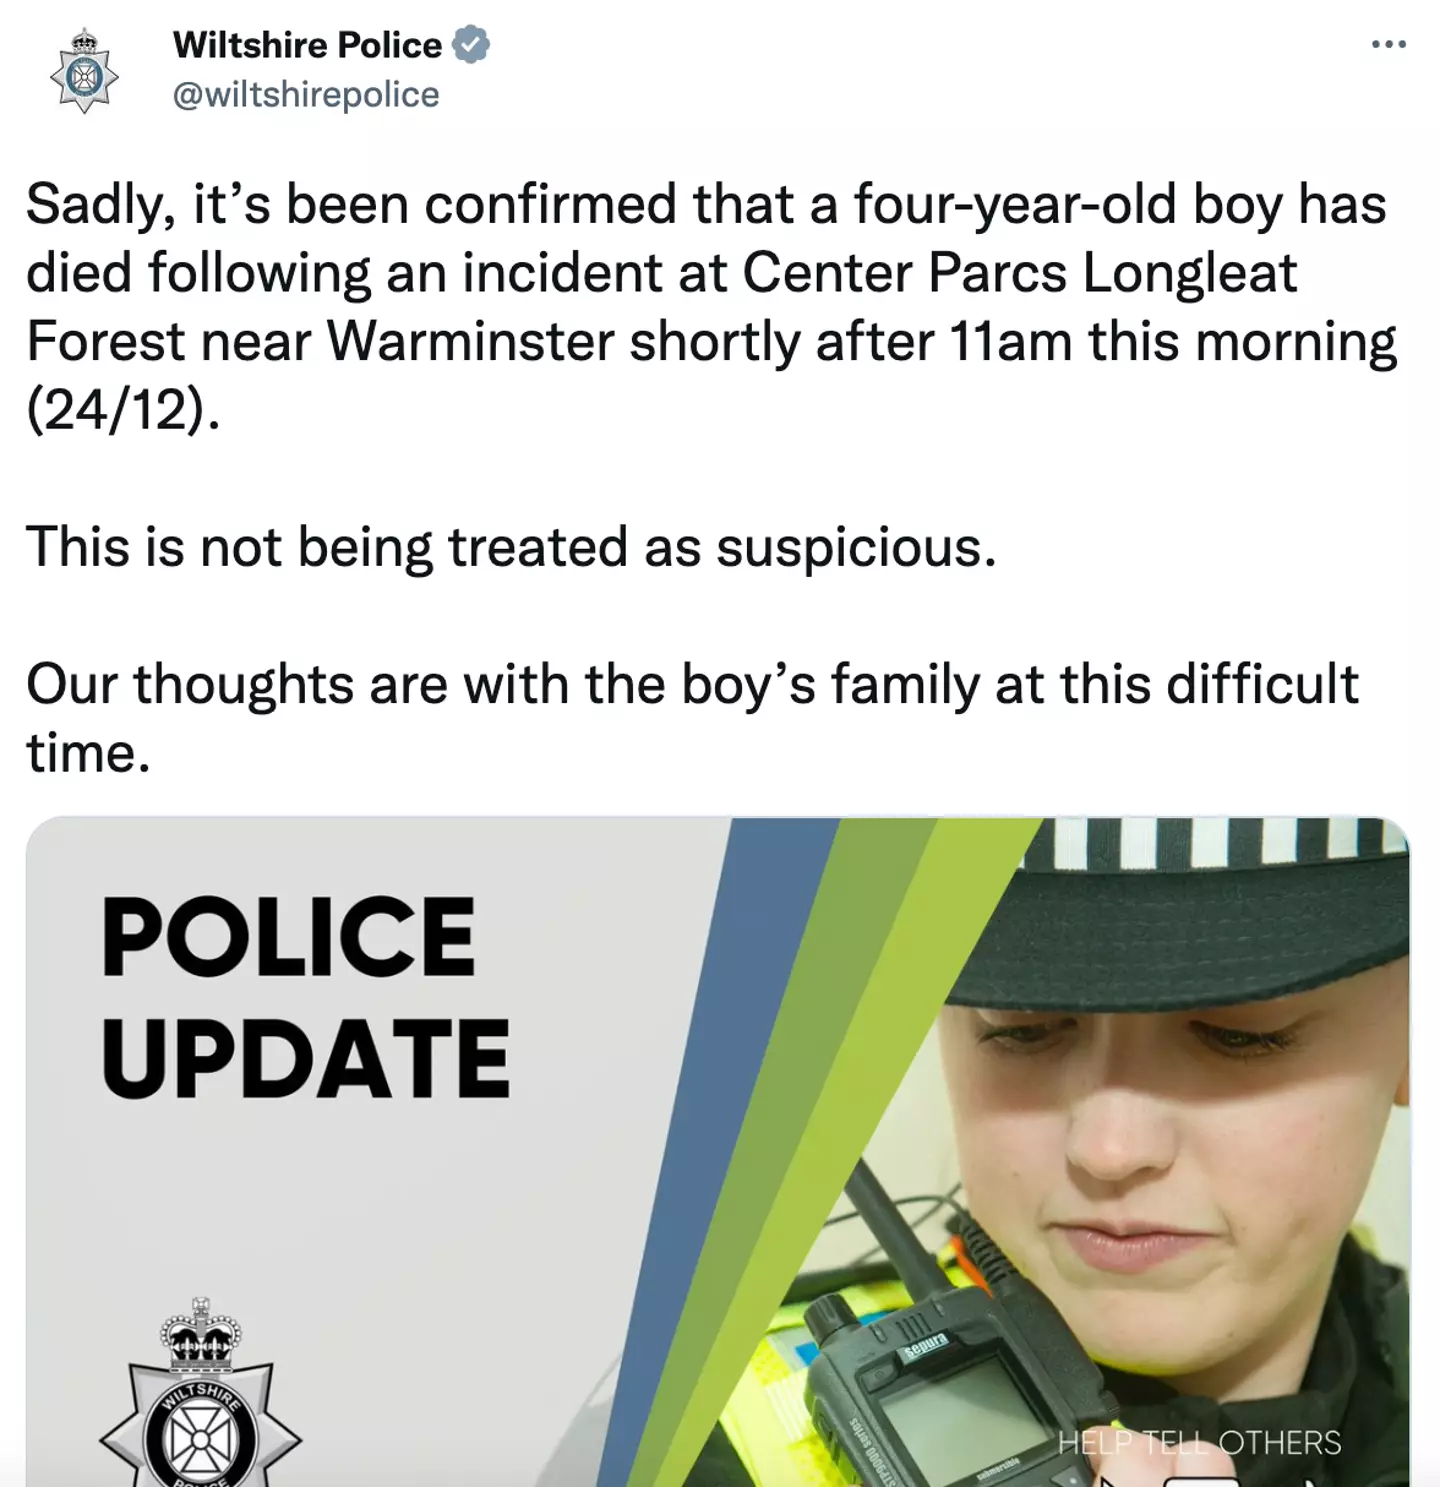 Wiltshire Police confirmed the boy died after the incident.